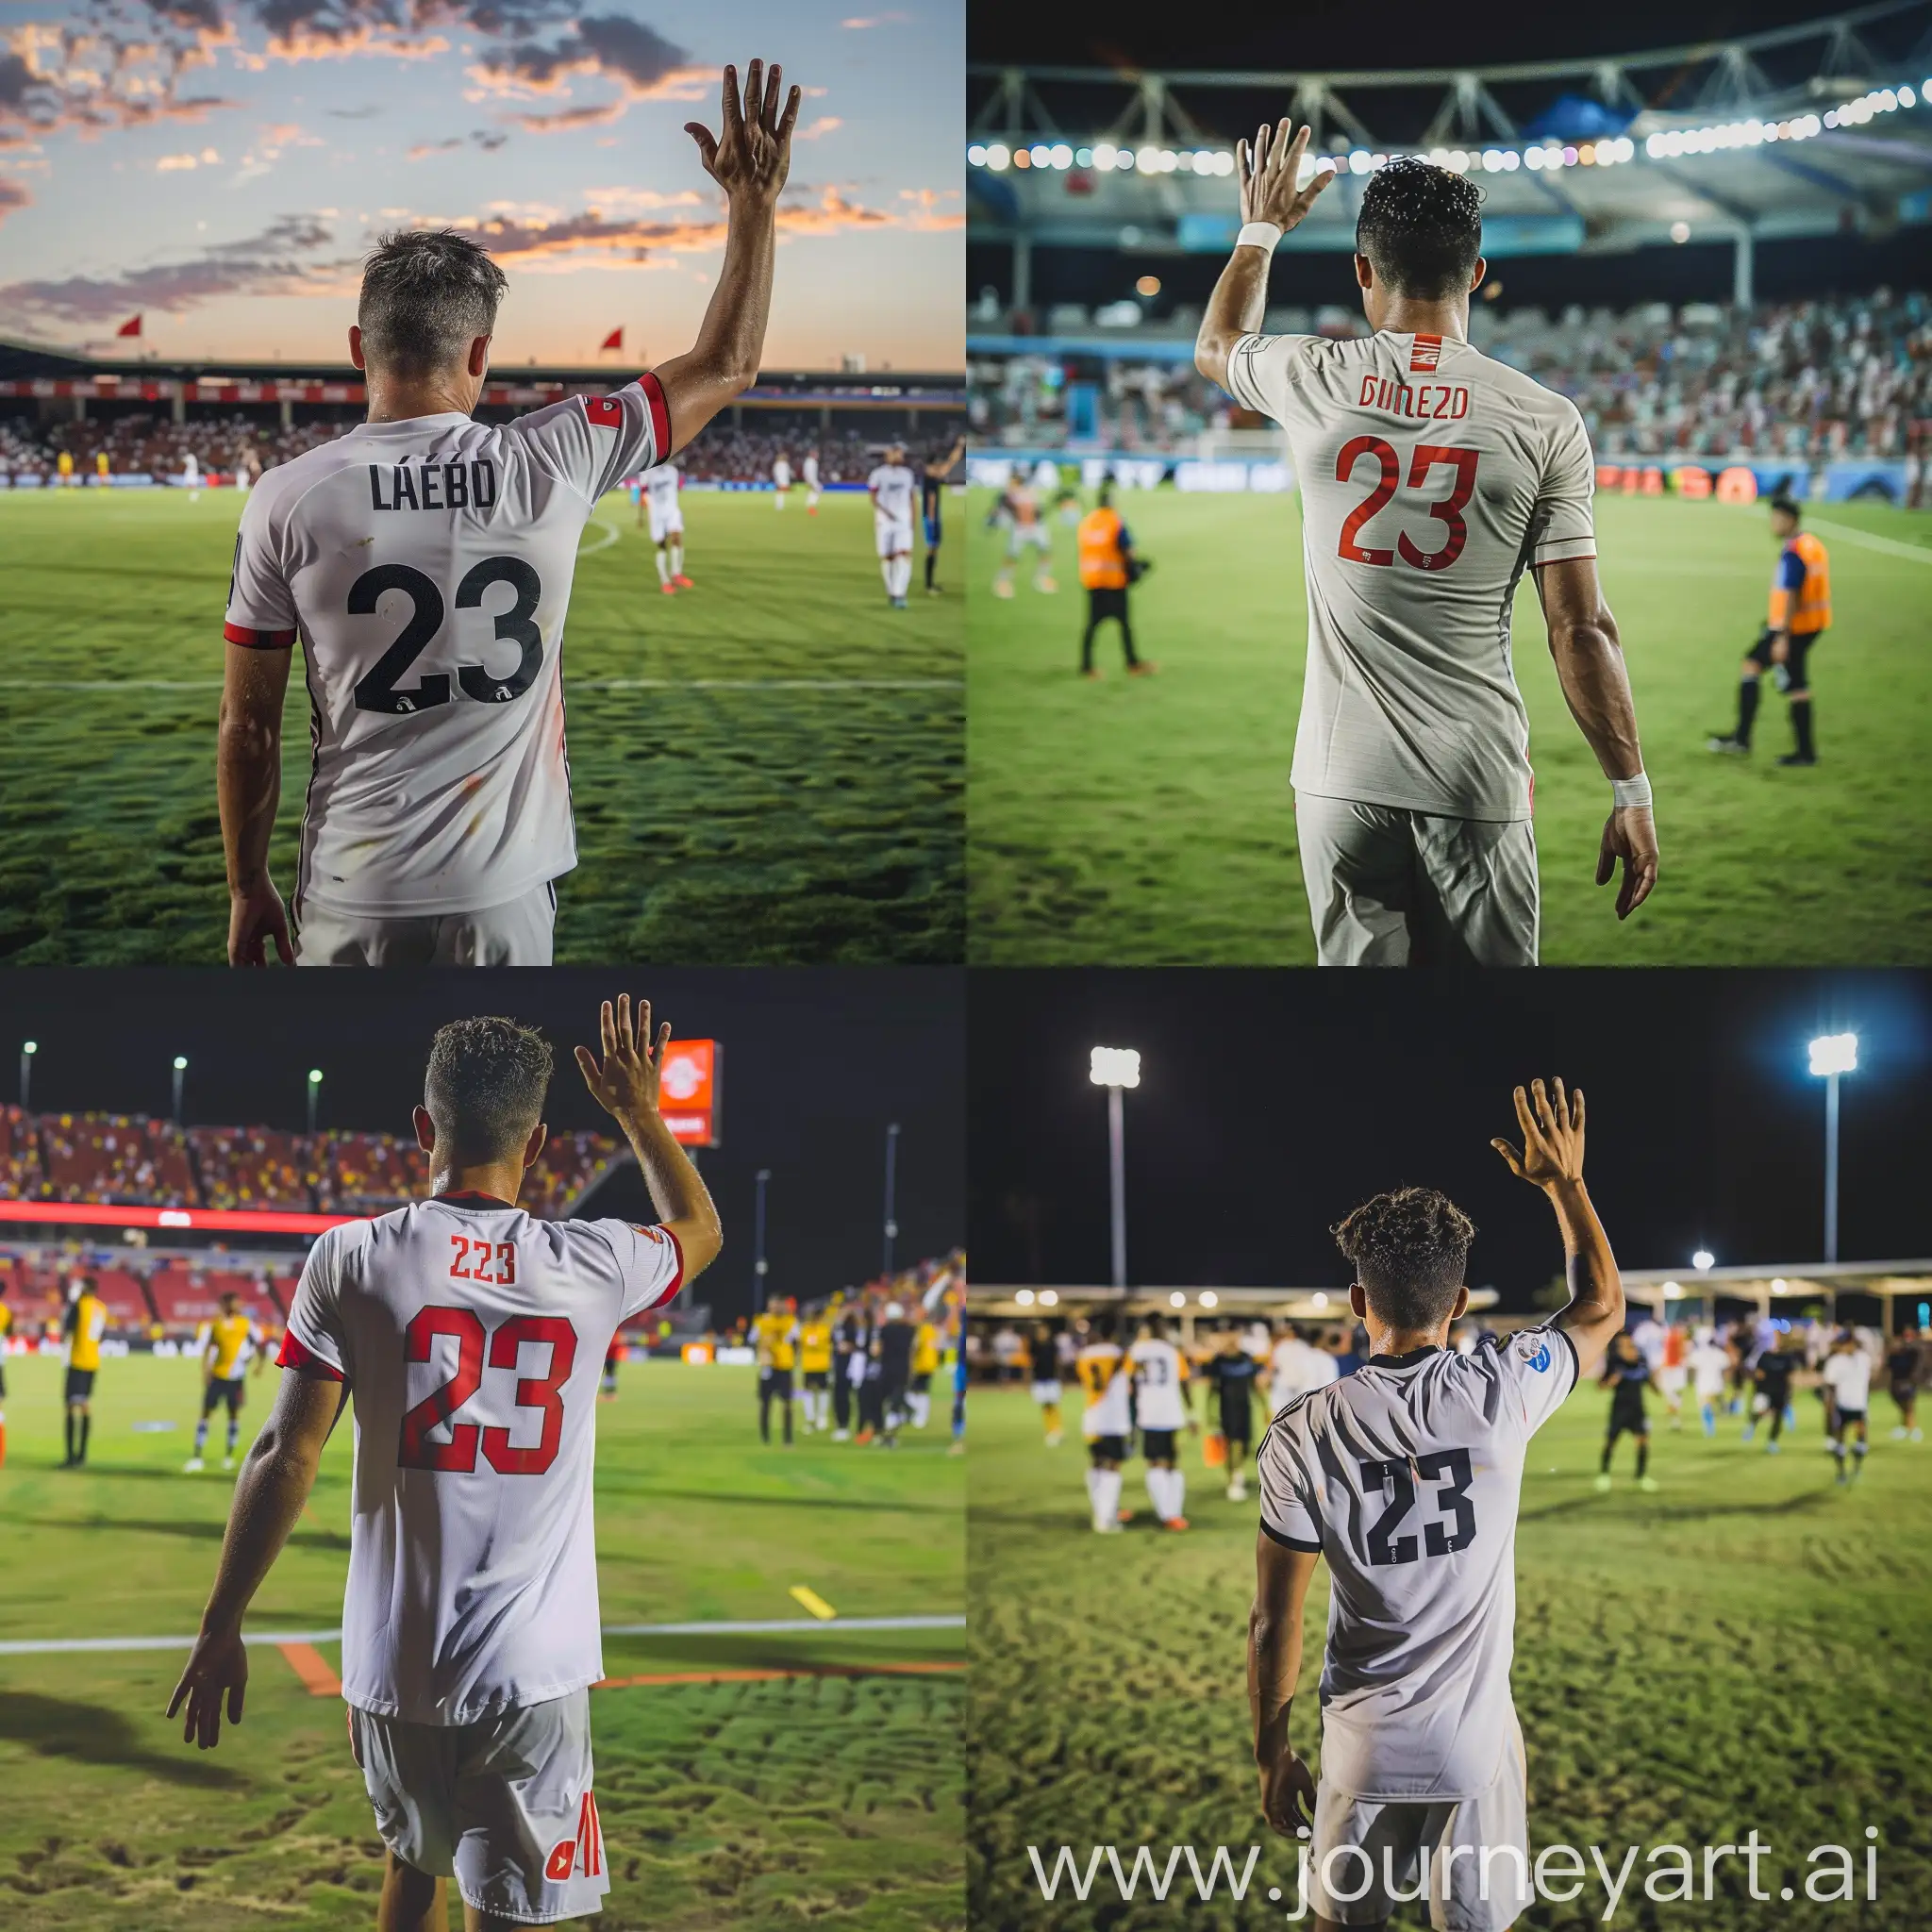 Soccer-Player-Number-23-Waving-Goodbye-to-Spectators-from-Field-Exit